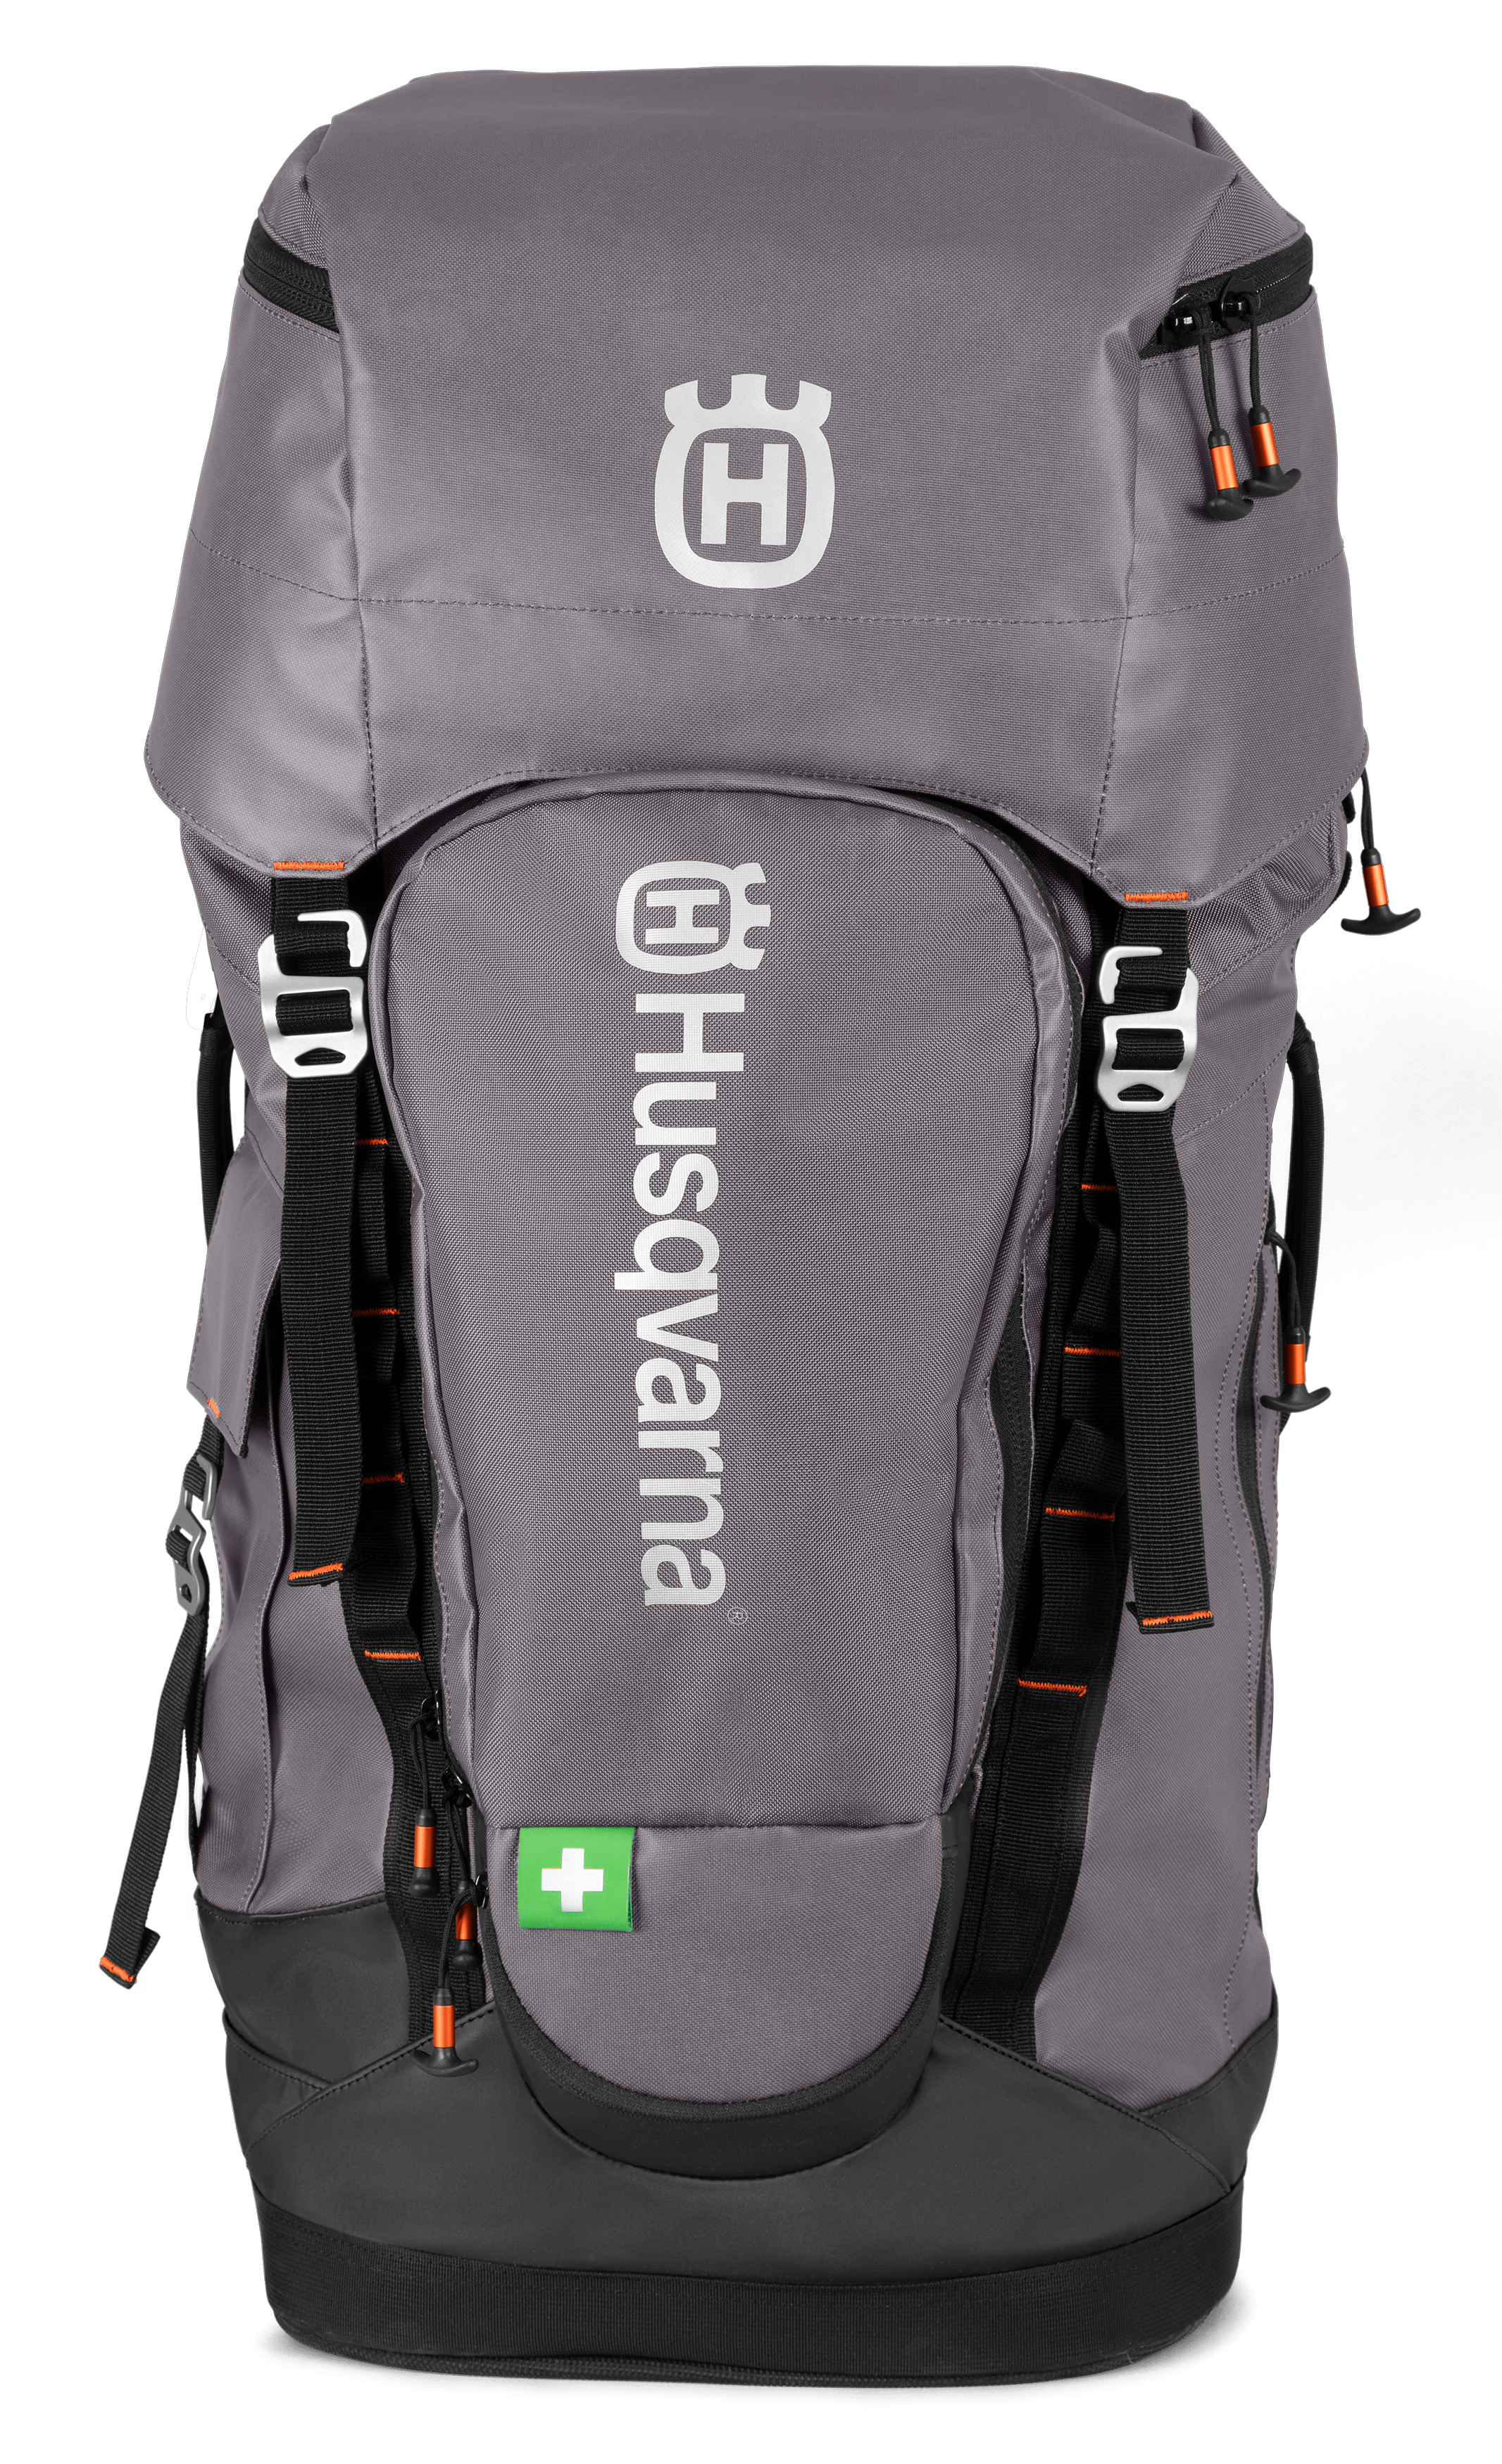 Gear backpack image 0